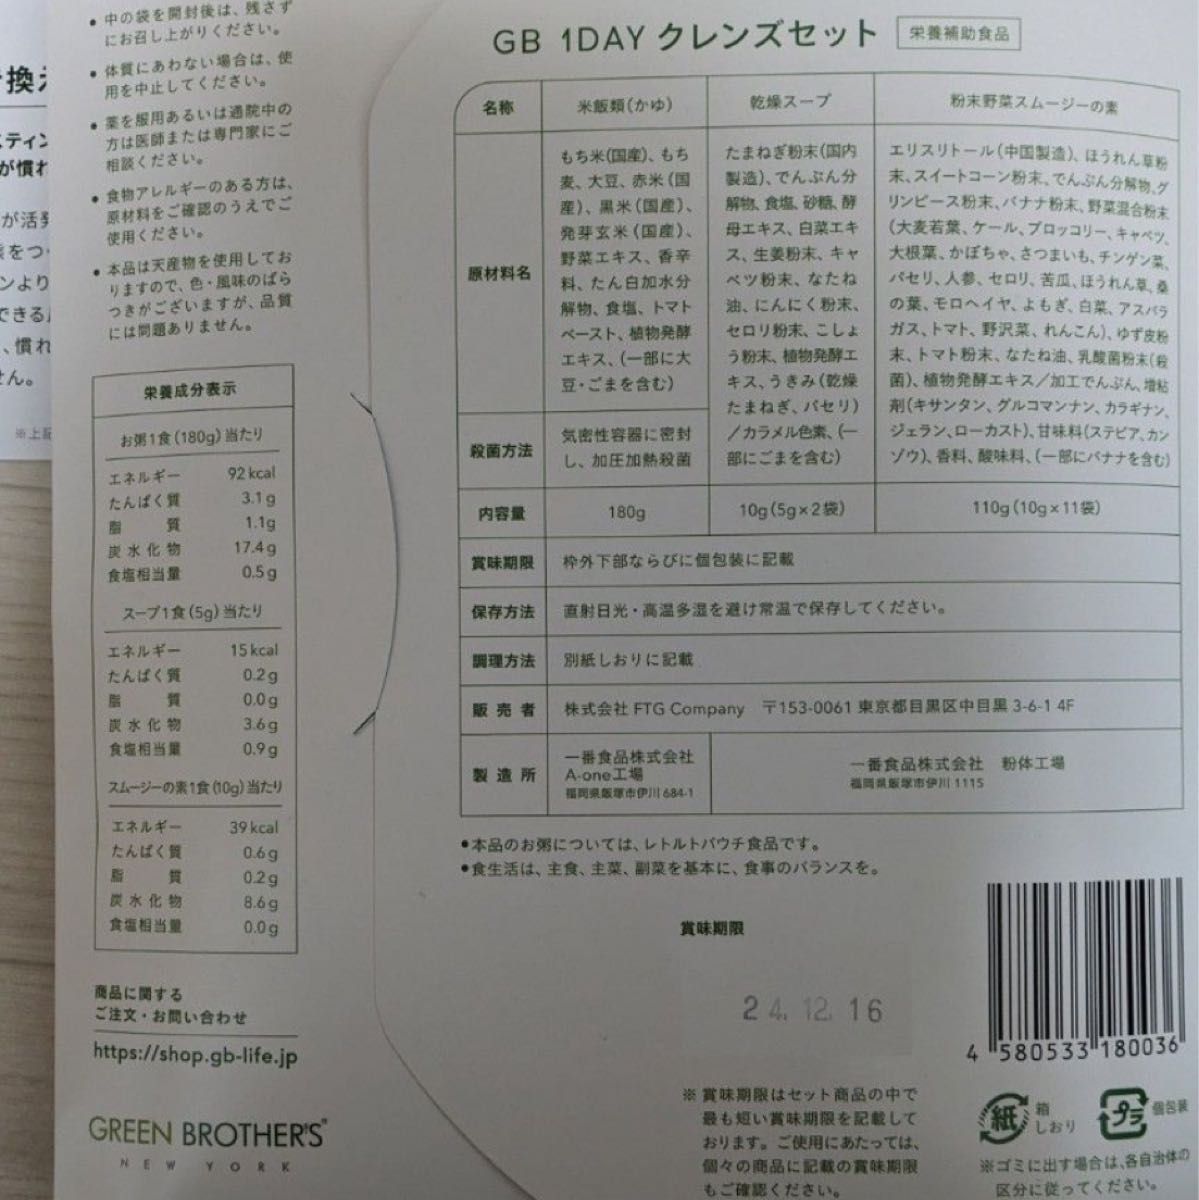 GREEN BROTHERS GB1DAY CLEANSE SET ワンデイクレンズ セット1週間分 1箱 ダイエット